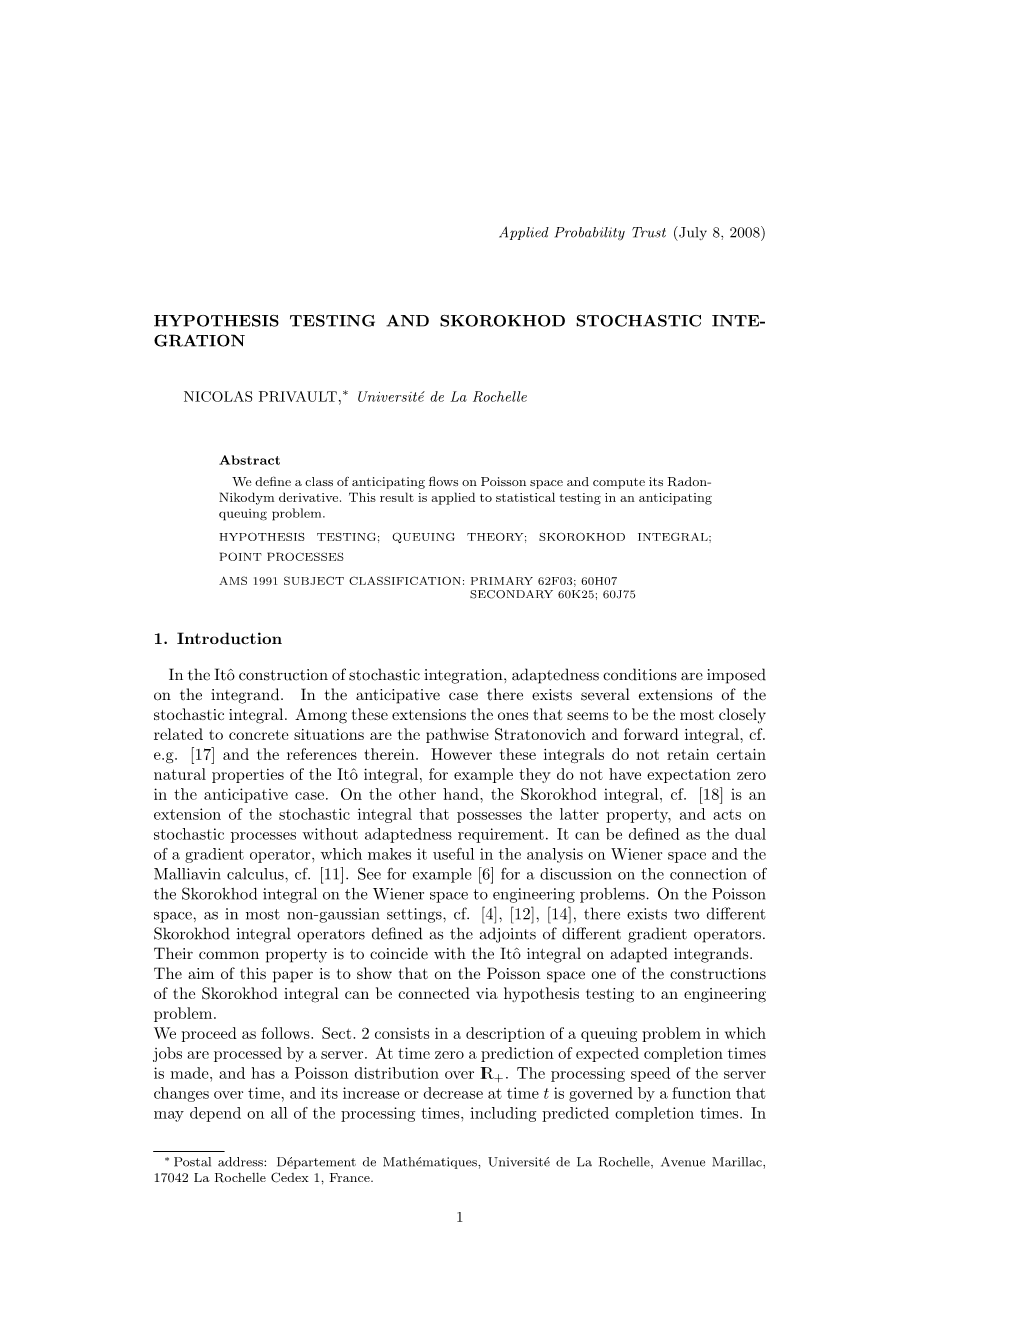 Hypothesis Testing and Skorokhod Stochastic Inte- Gration